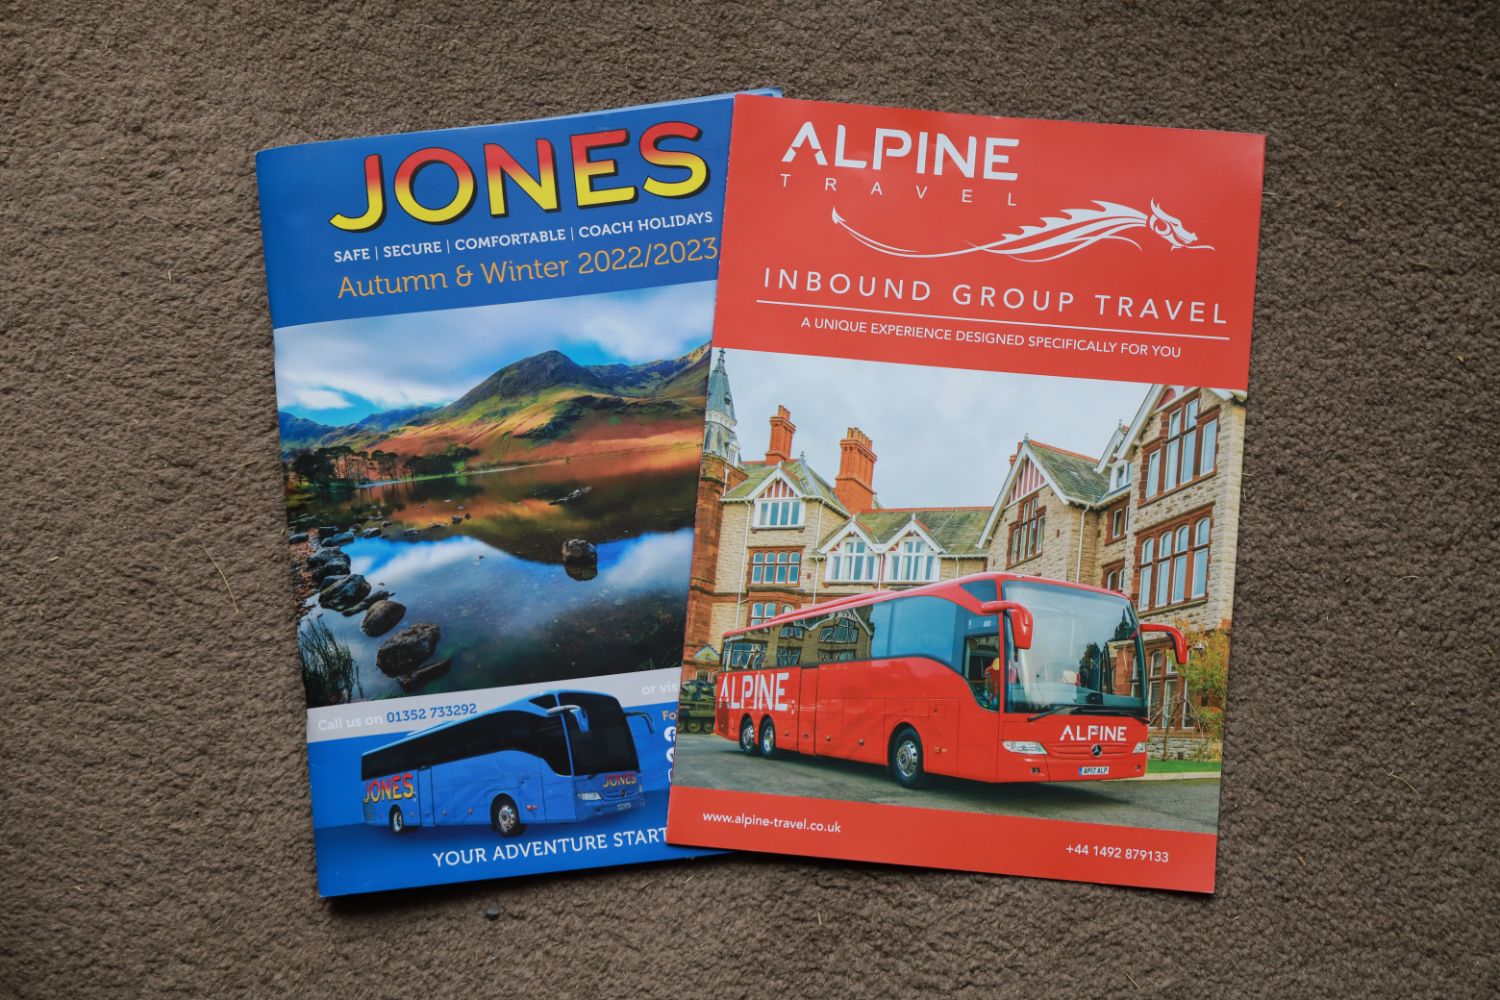 High quality brochures for Jones Holidays and Alpine Travel’s destination management activities in Wales